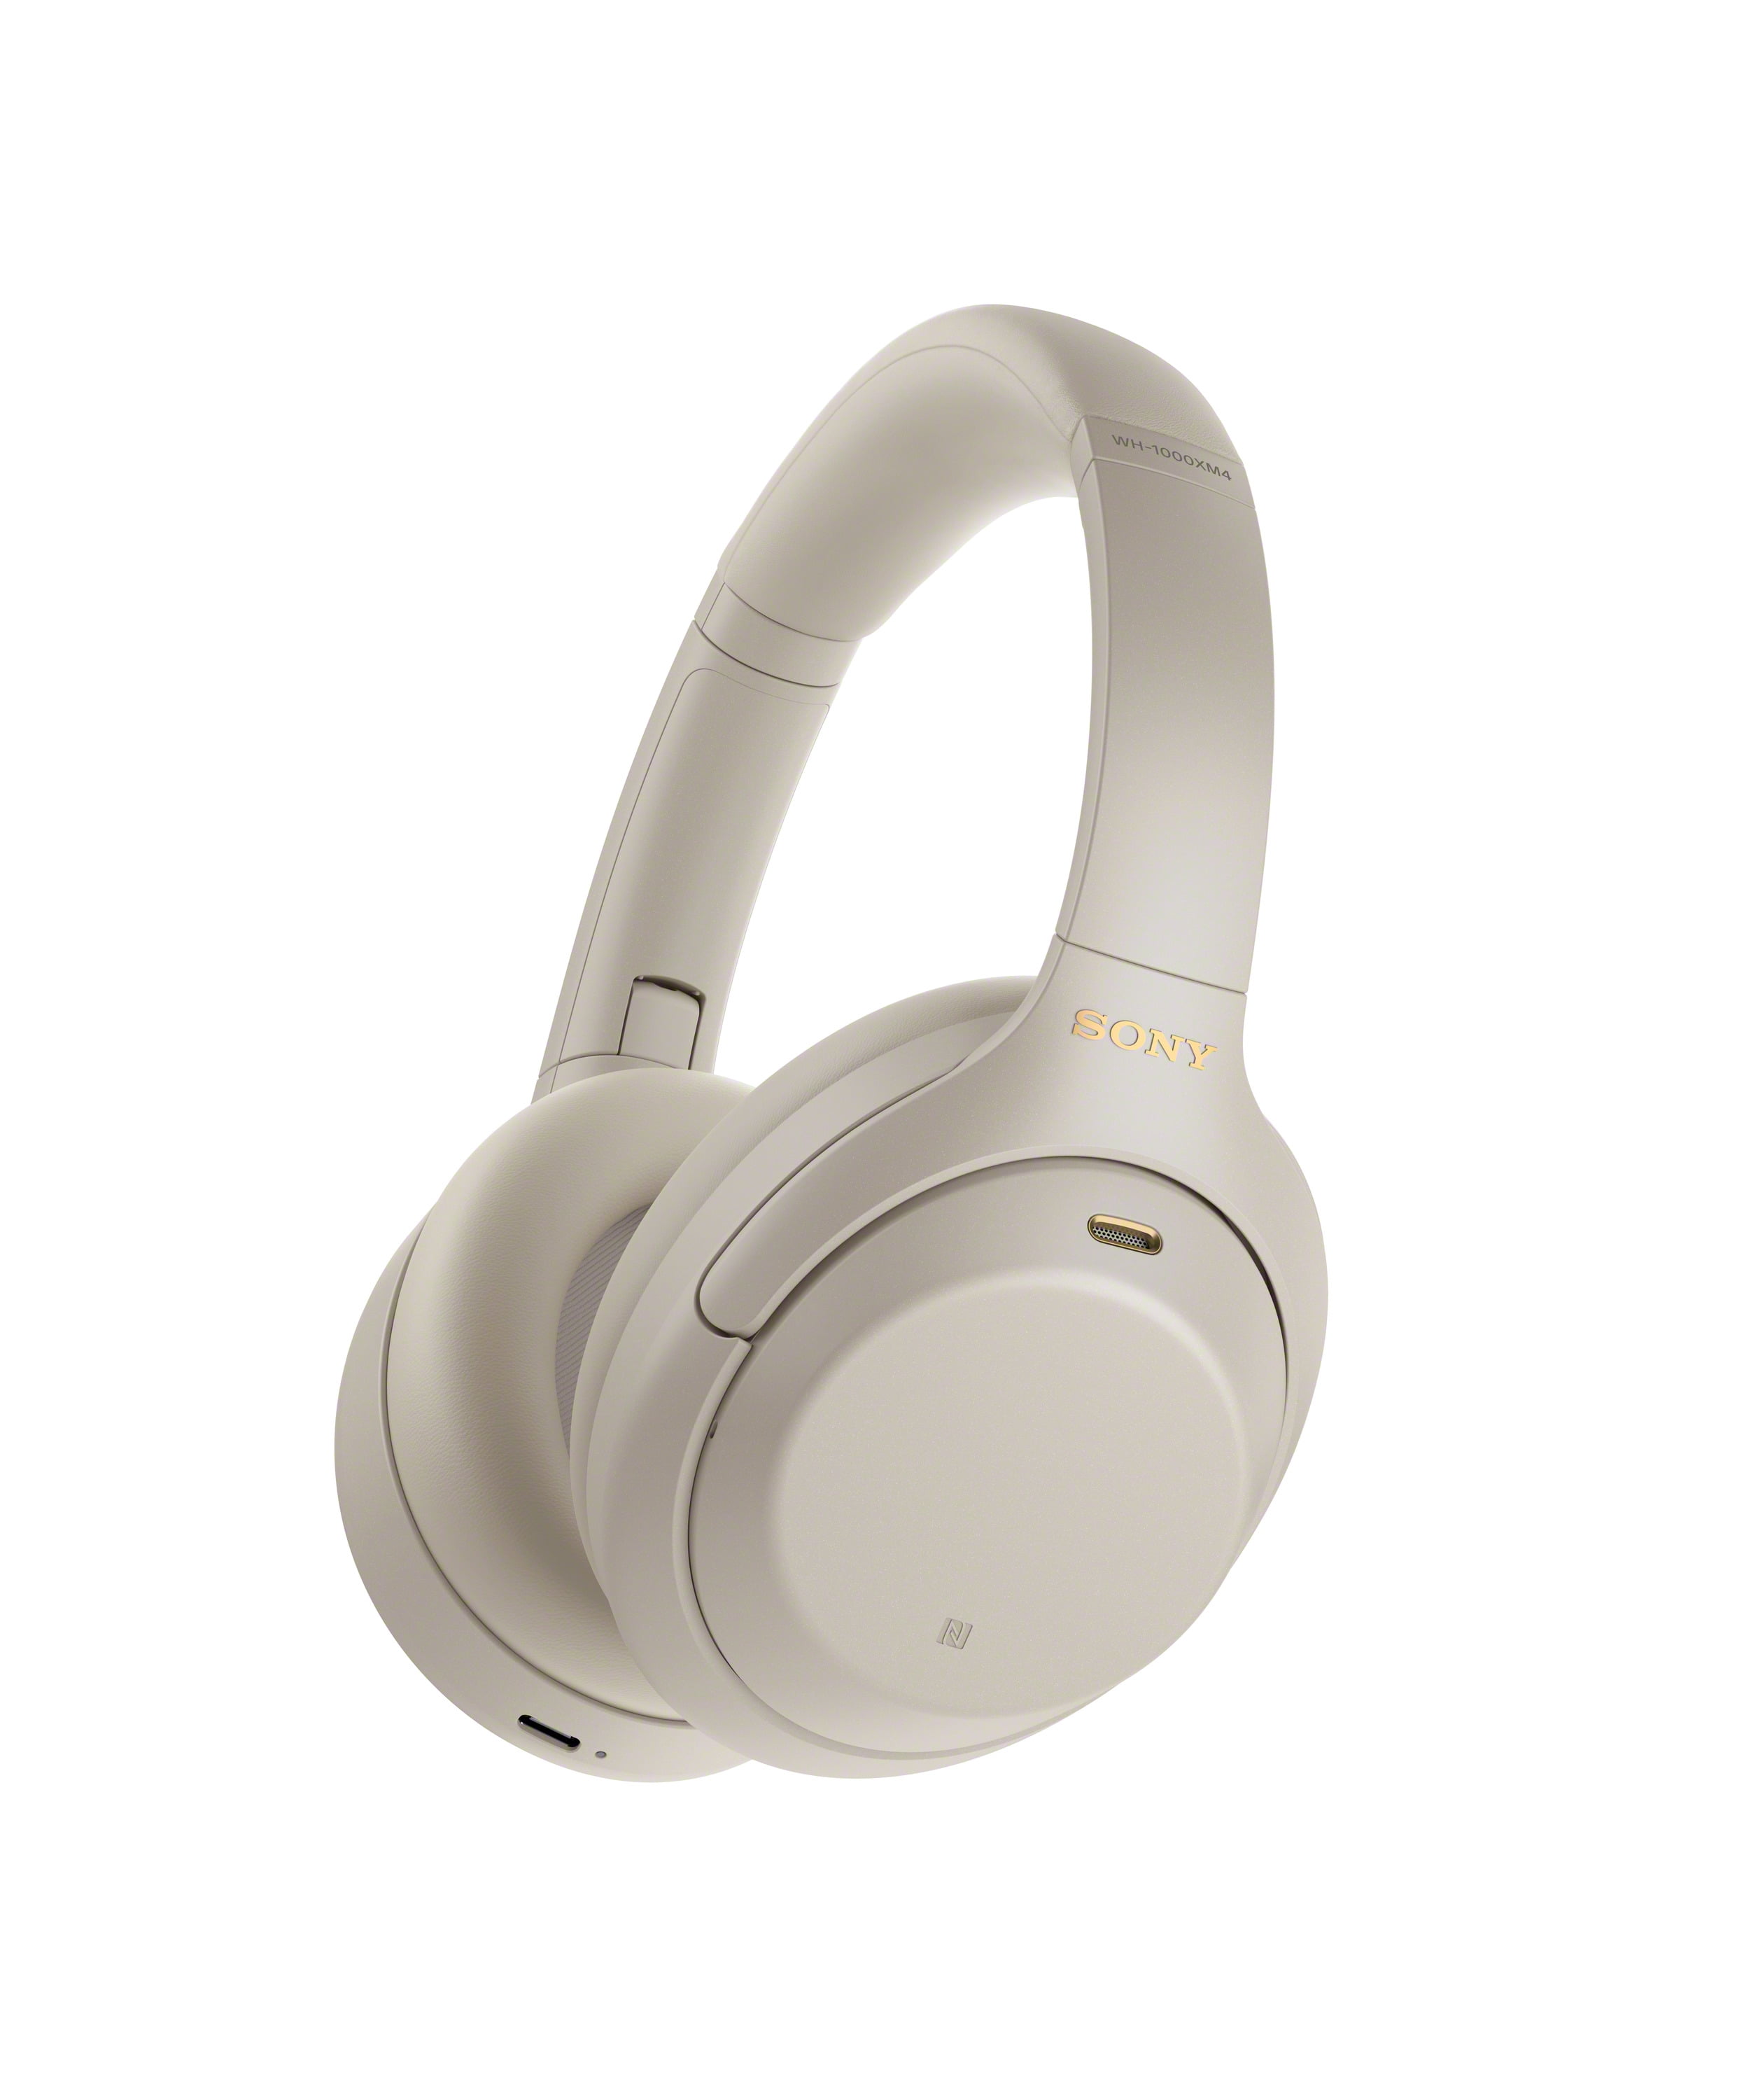 Sony WH-1000XM4 Wireless Over-the-Ear Headphones with Google